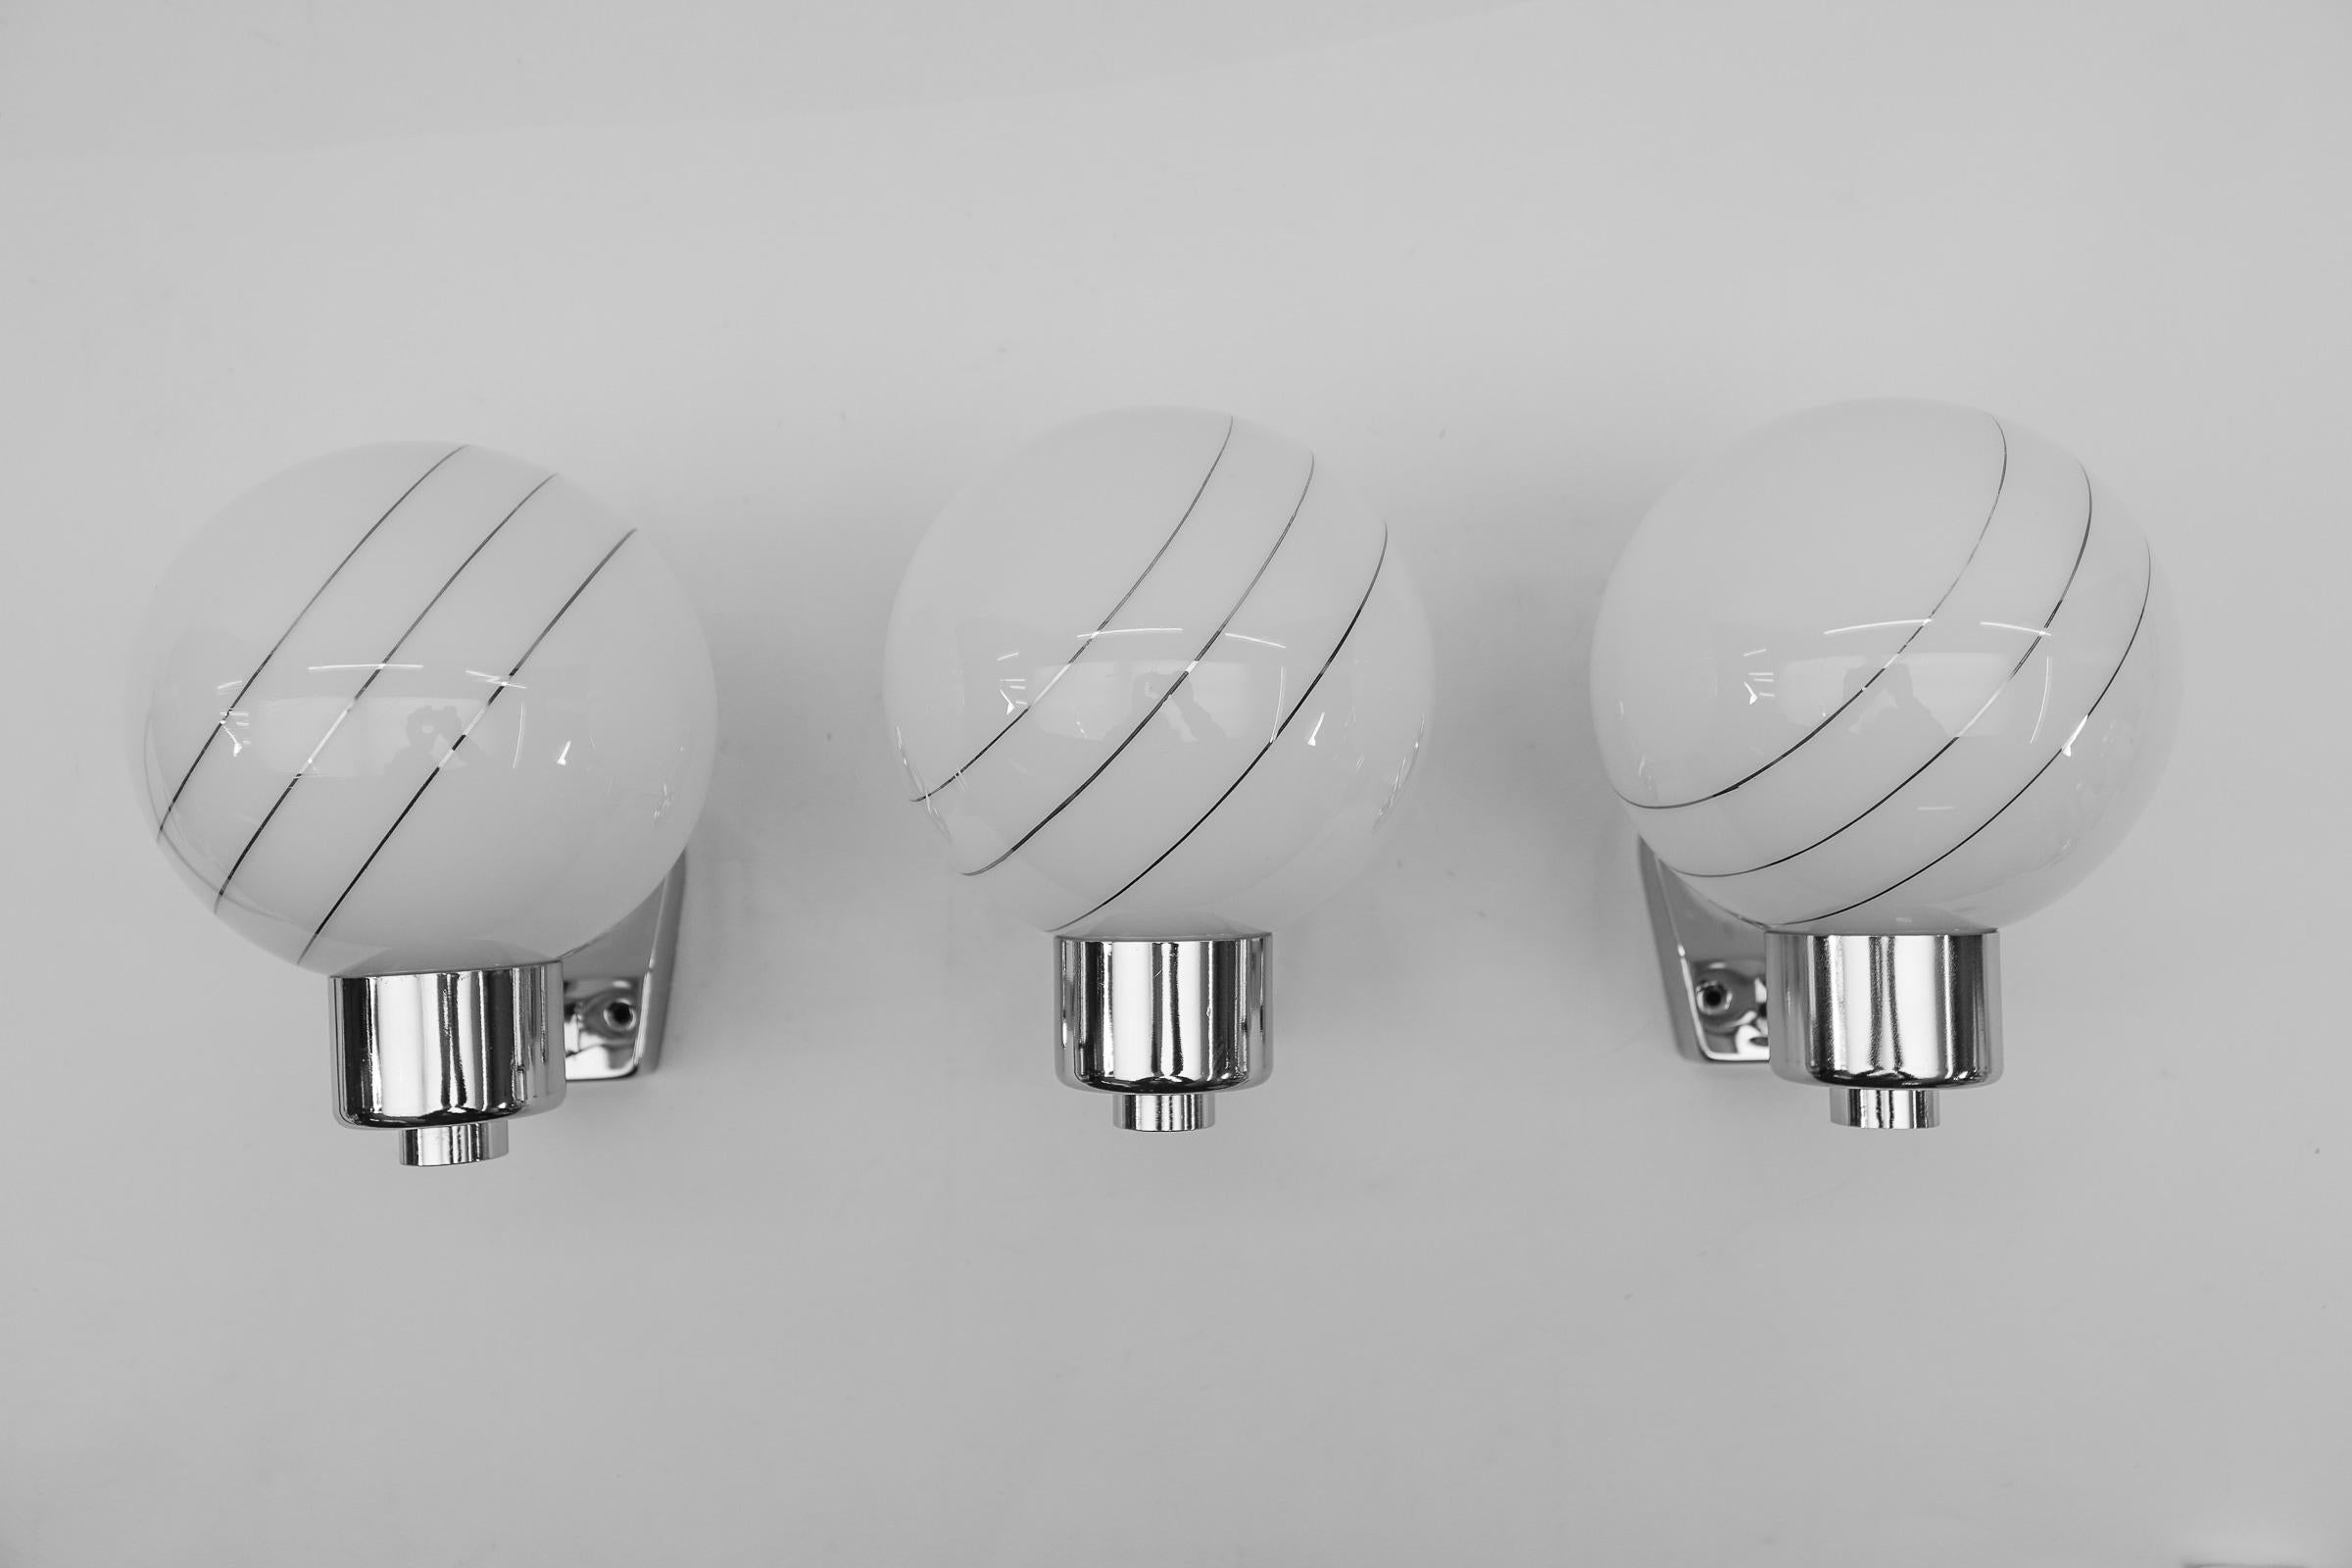 Set of 3 Space Age Chrome Wall Lamps with Milk Glass Ball Shades, 1970s For Sale 2